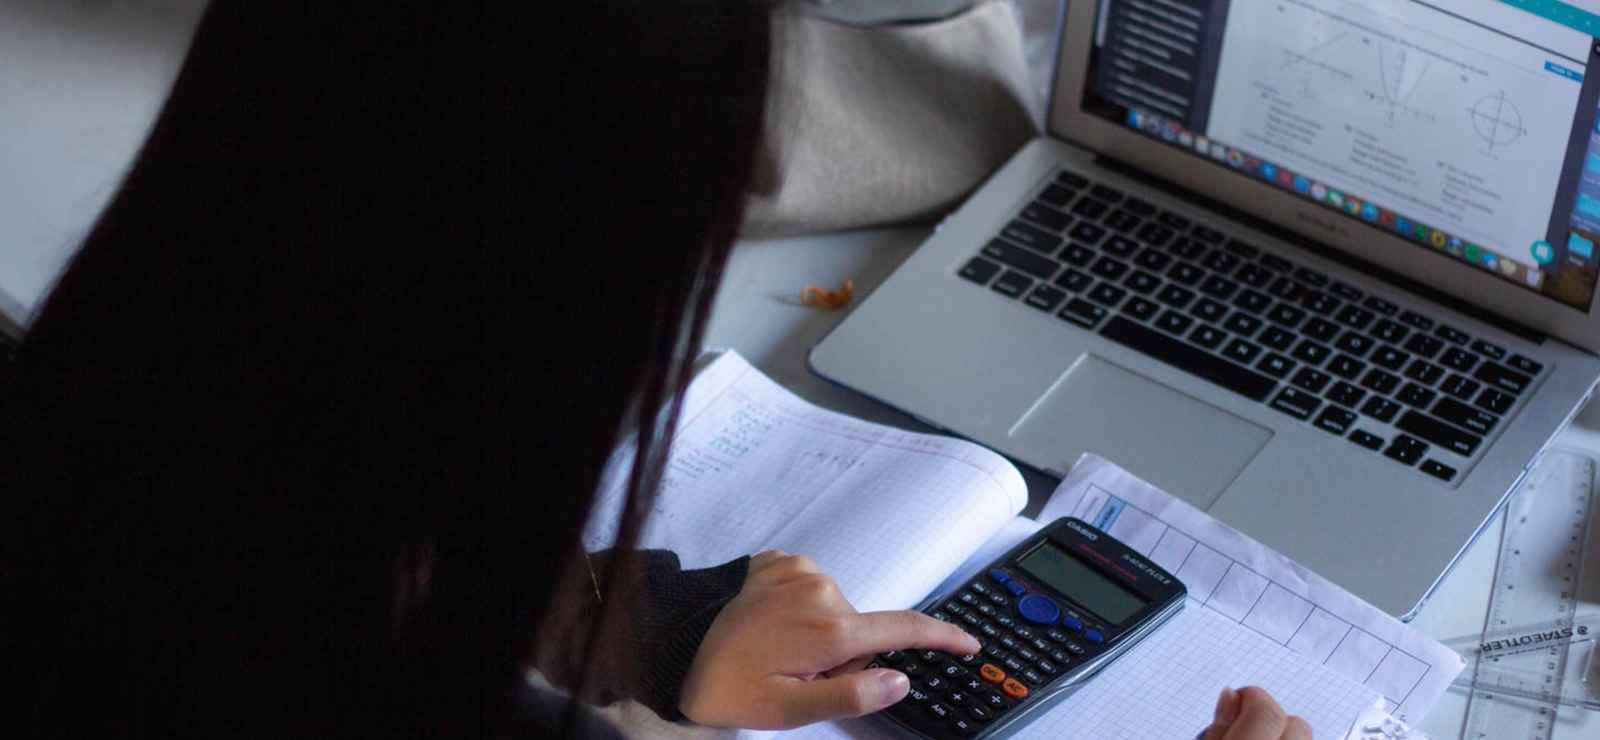 Student at desk in front of computer using calculator